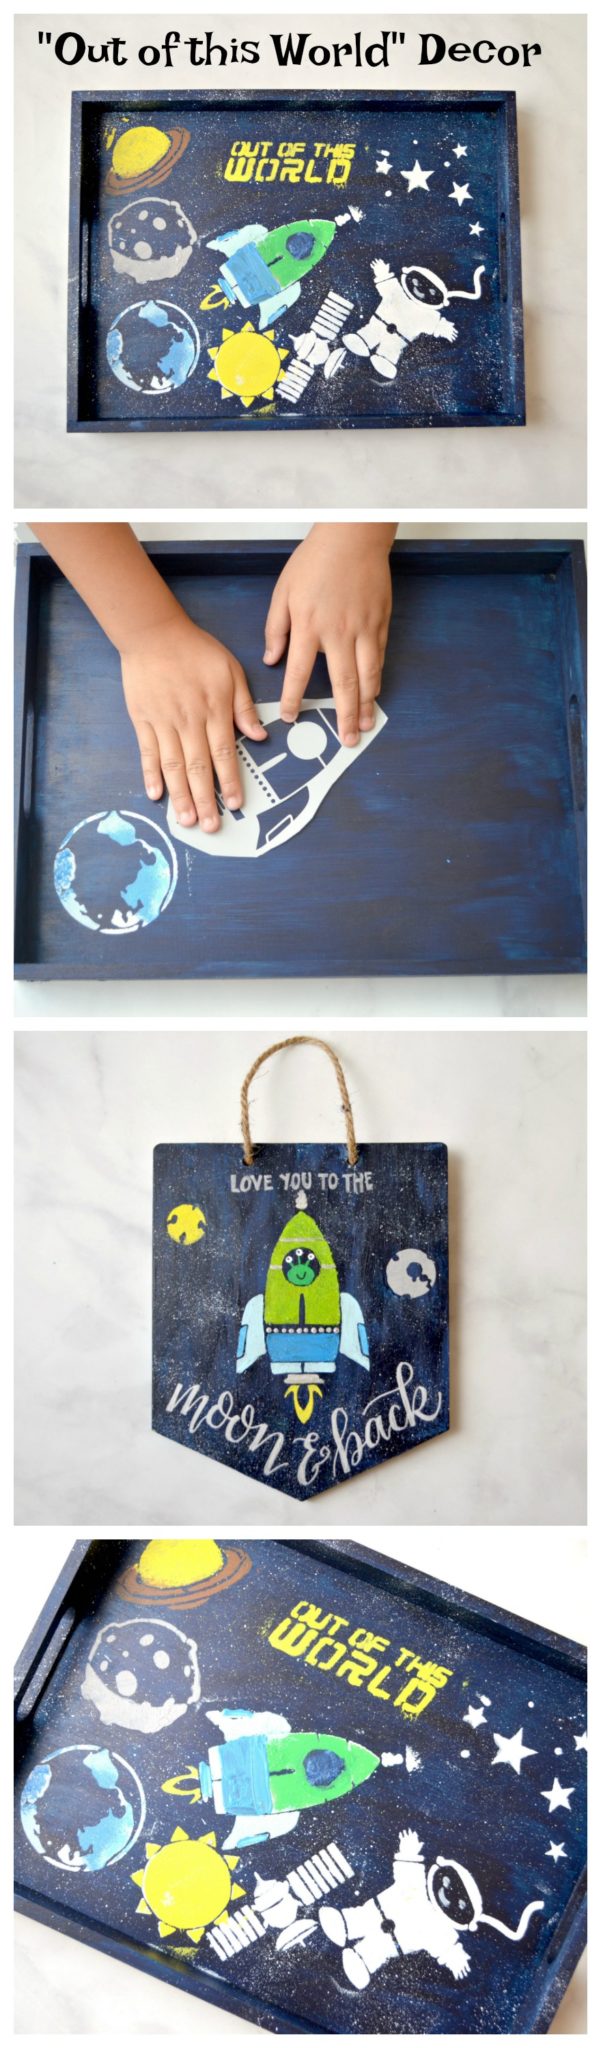 Out of this World Decor for Kids